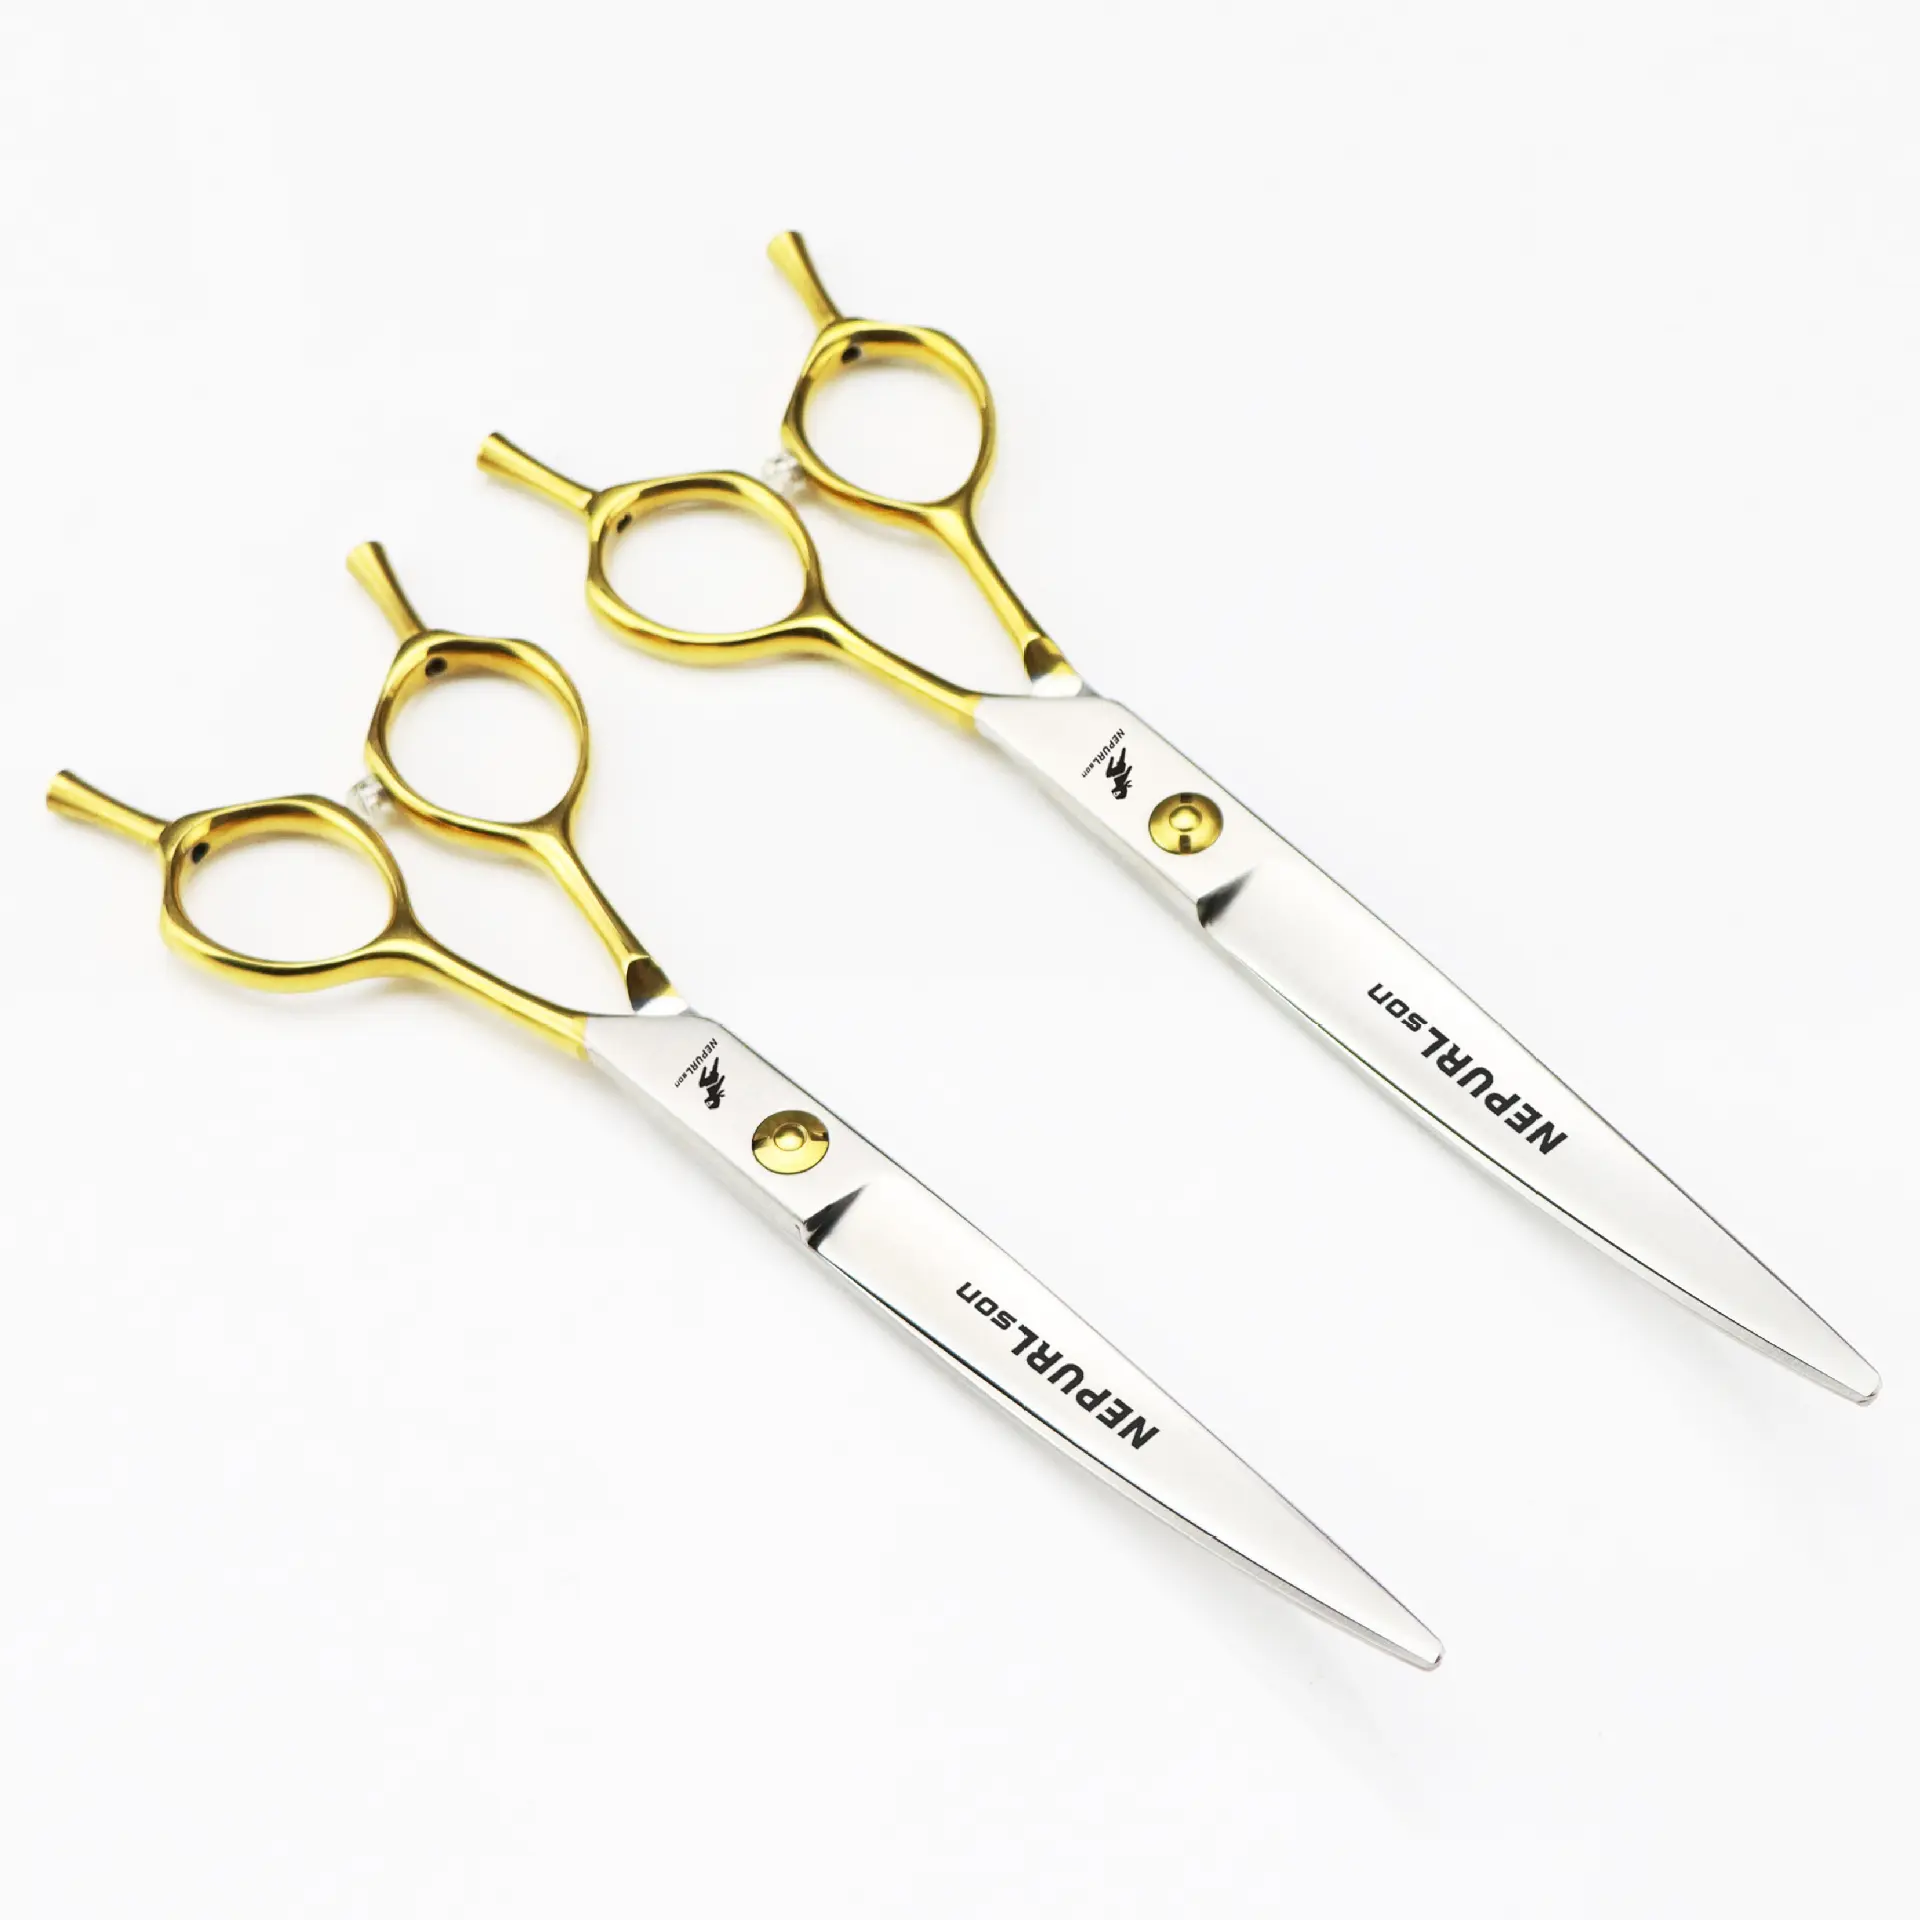 Half Gold Good Recommended 7.0 7.5 inch New Fashion Design Beauty Barber Scissors Pet Grooming Scissors